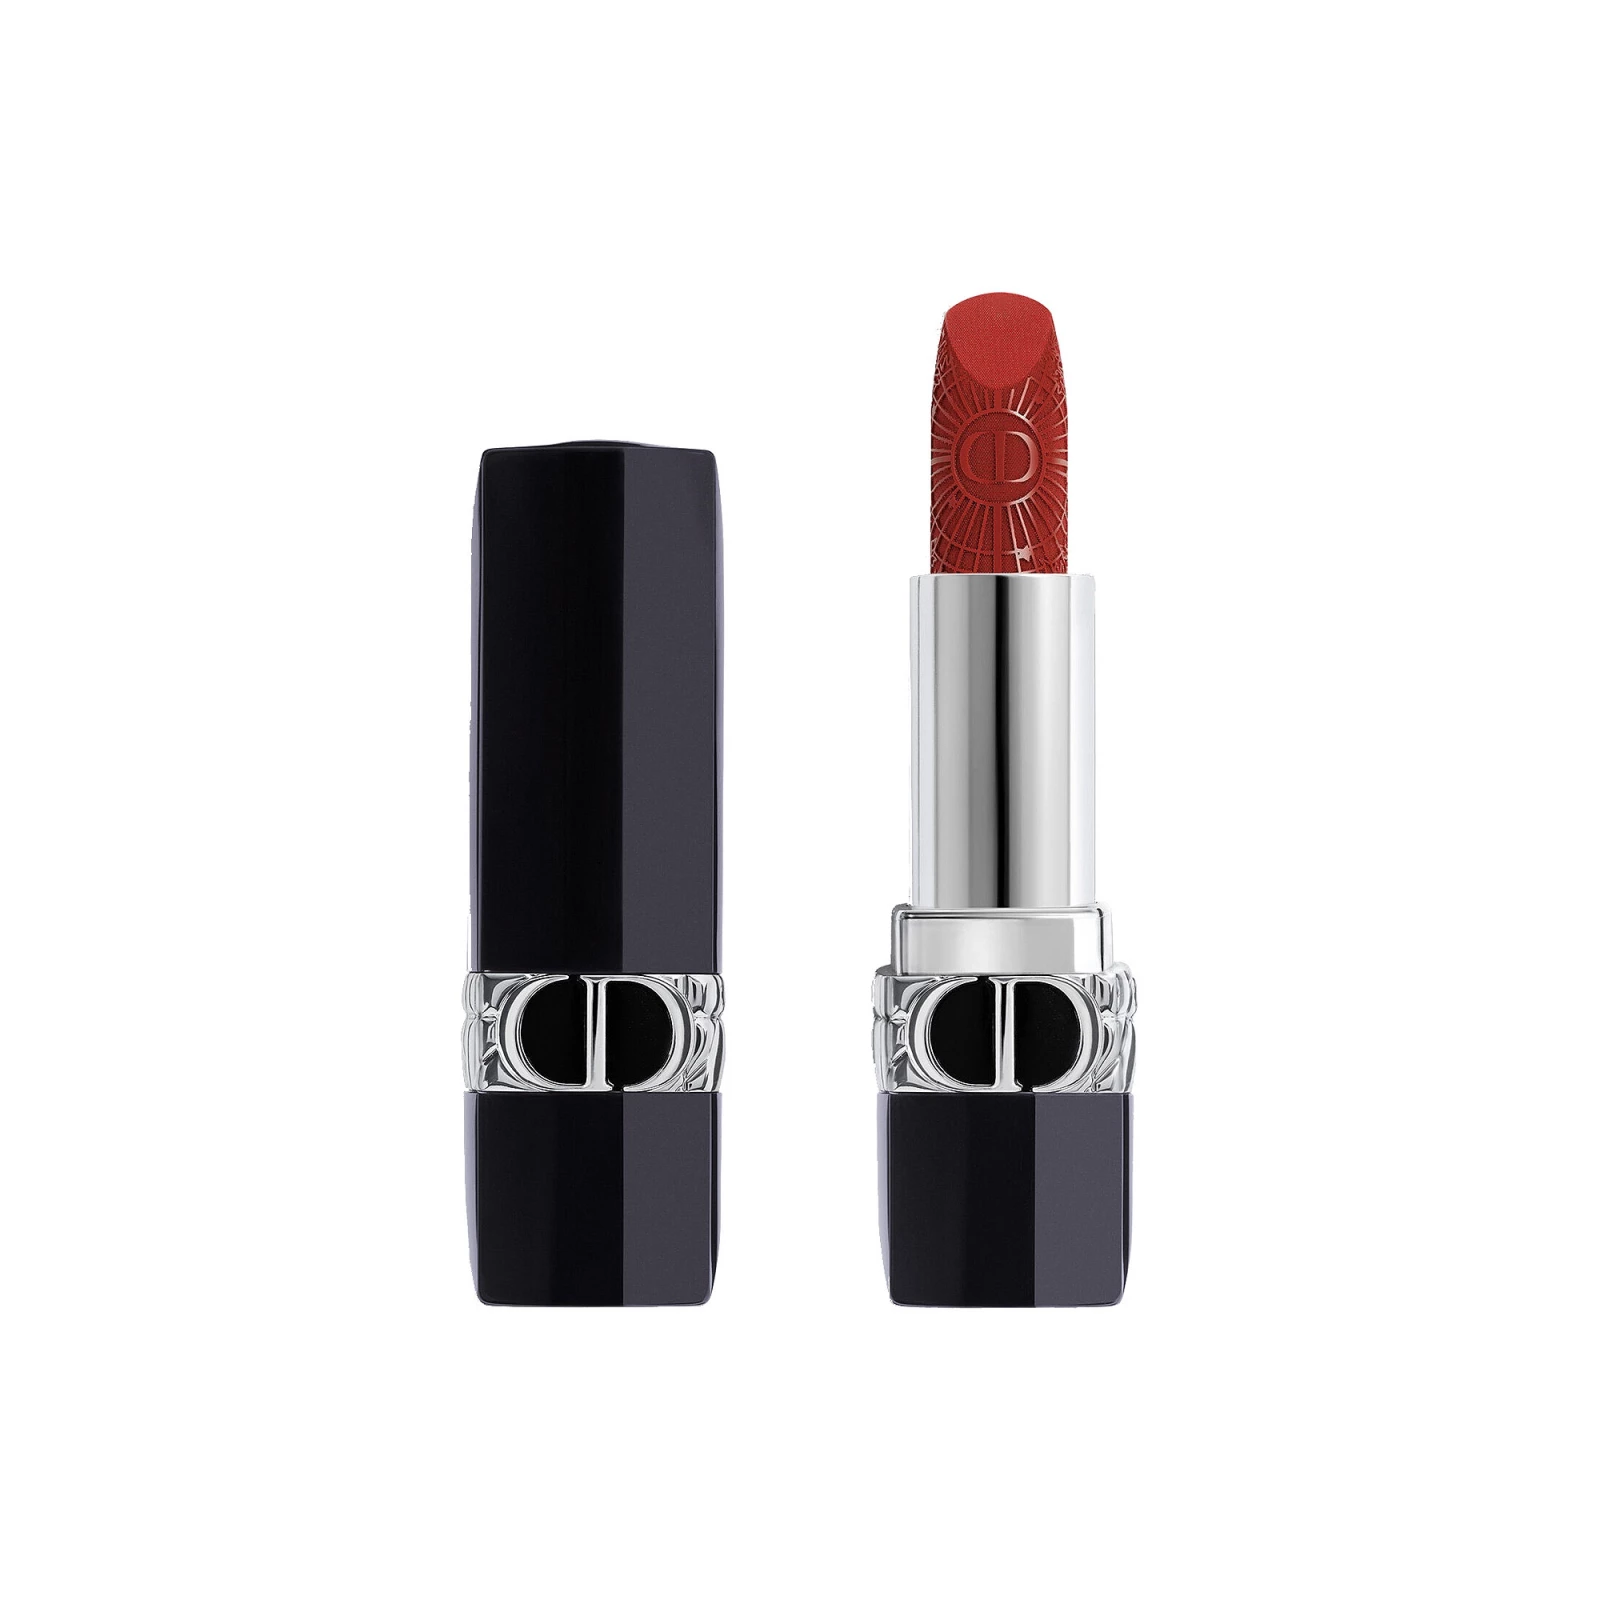 Rouge Dior  New Look limited edition Lipstick and coloured lip balm   longwear floral lip care  refillable case  houndstooth motif  Aelia  Duty Free 10 off on your online order